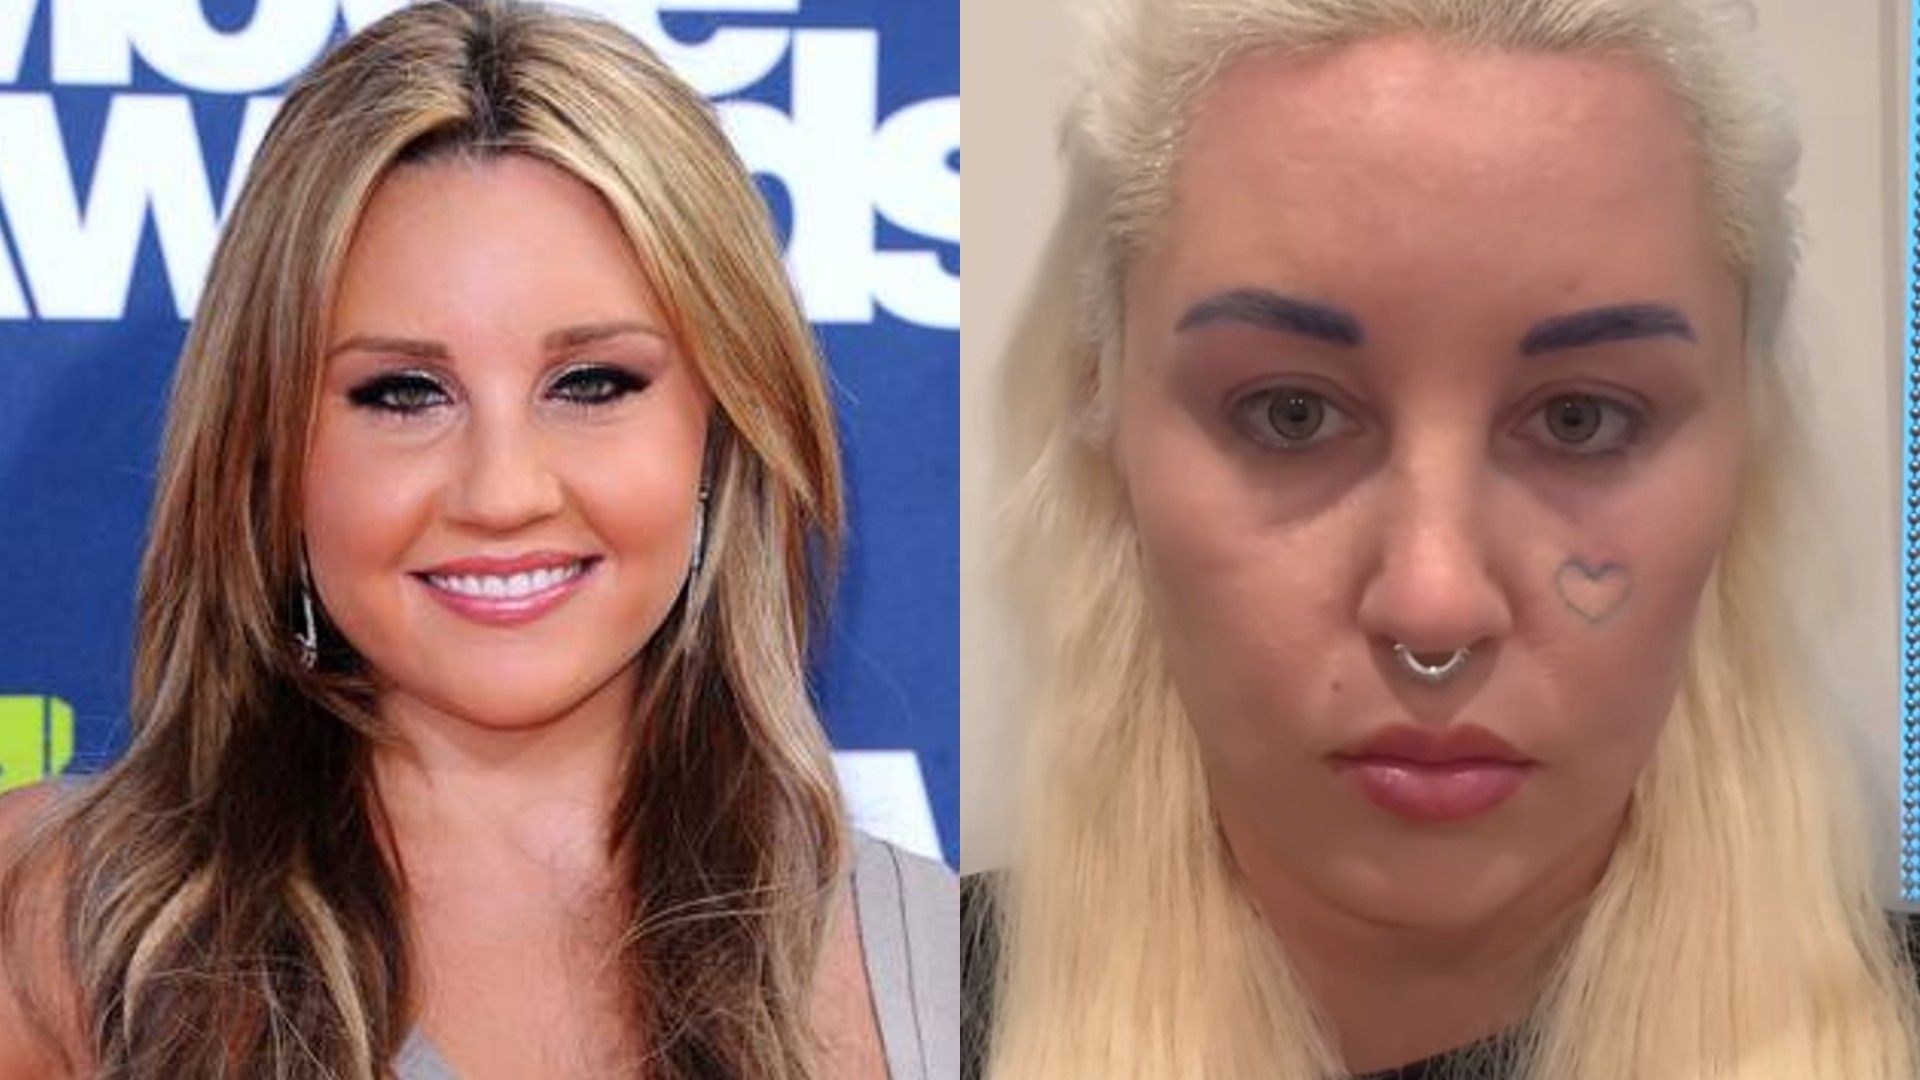 Amanda Bynes - before and after the surgery